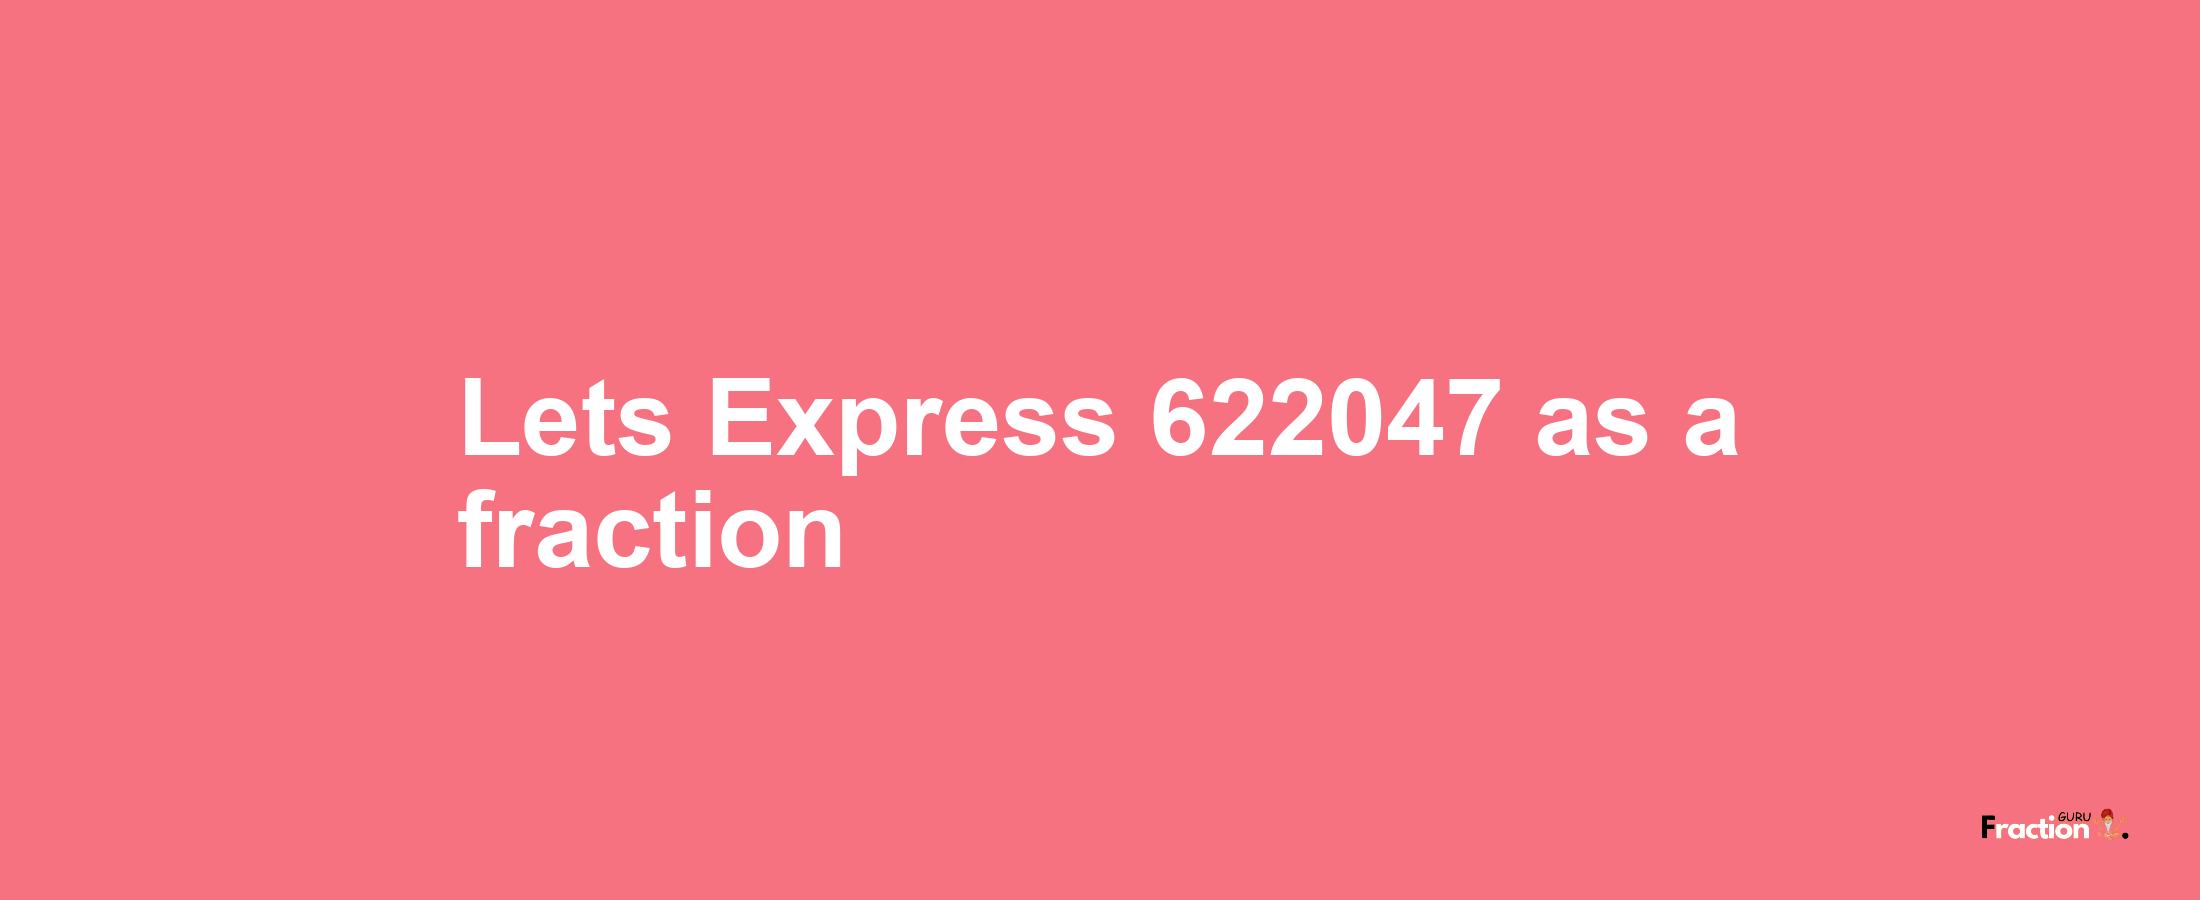 Lets Express 622047 as afraction